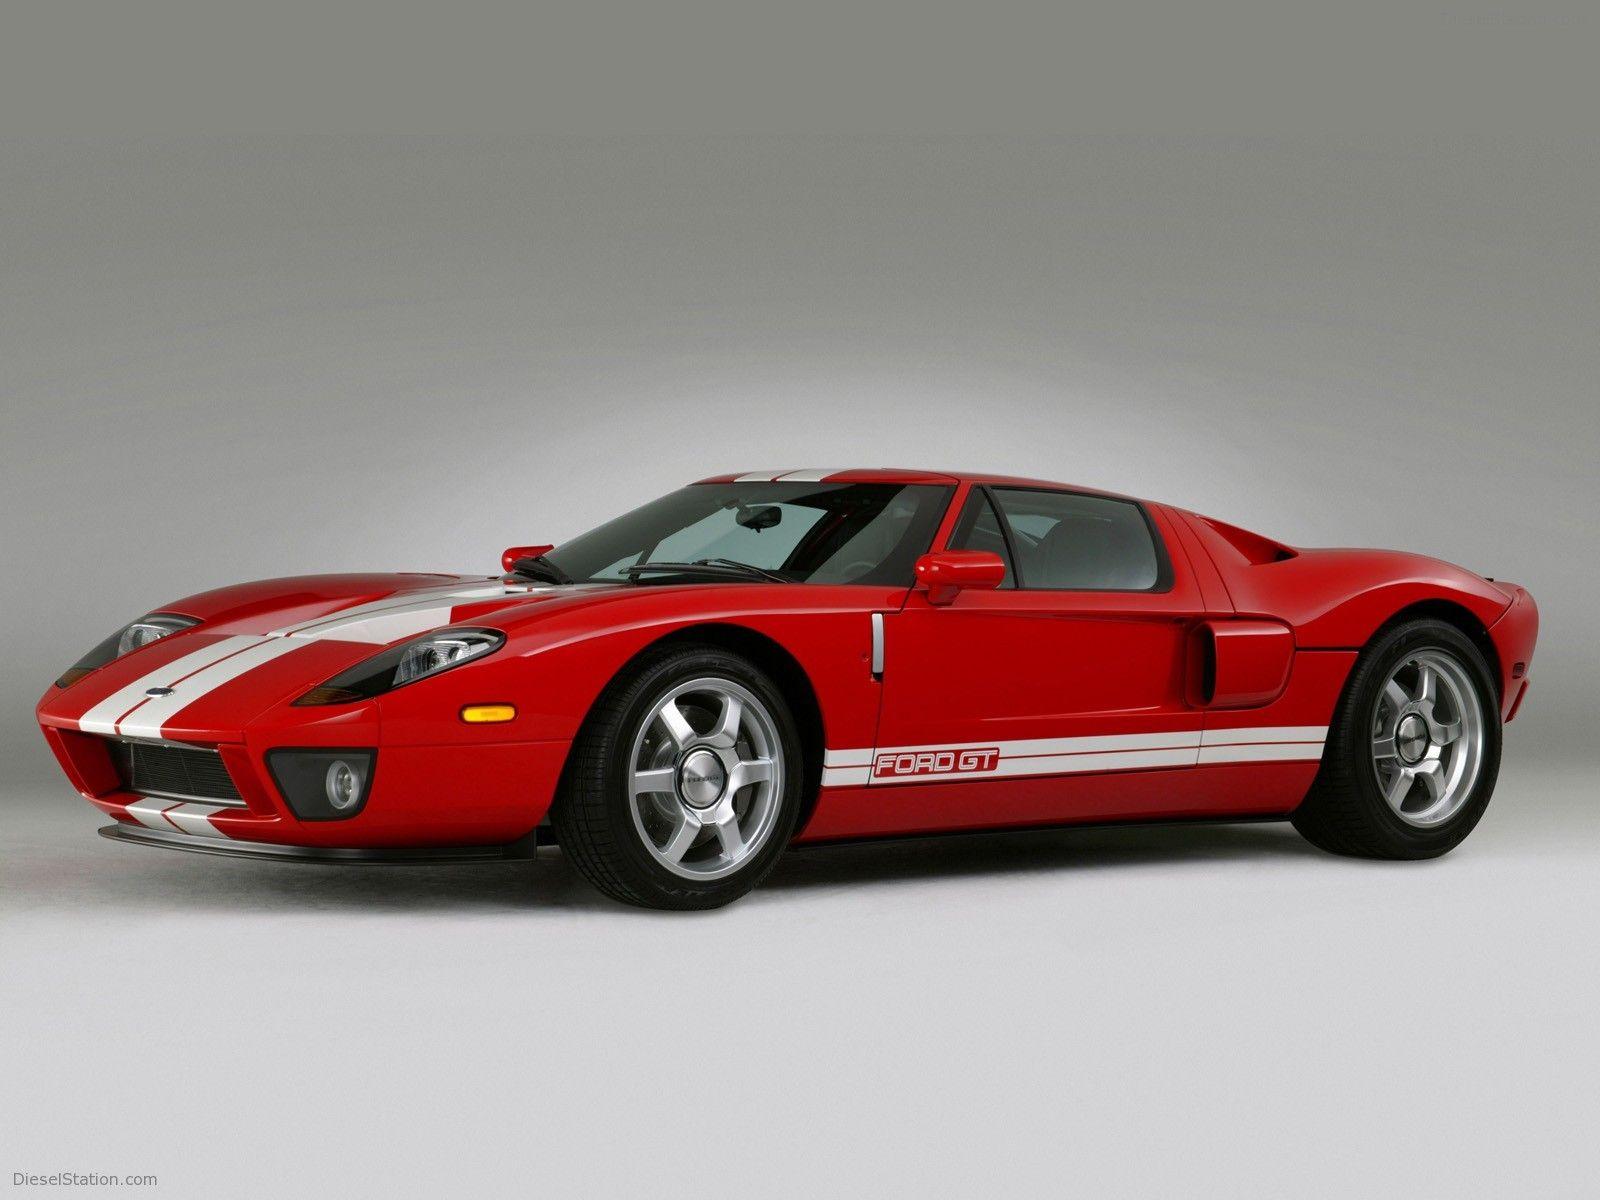 Ford GT Exotic Car Wallpaper of 244, Diesel Station